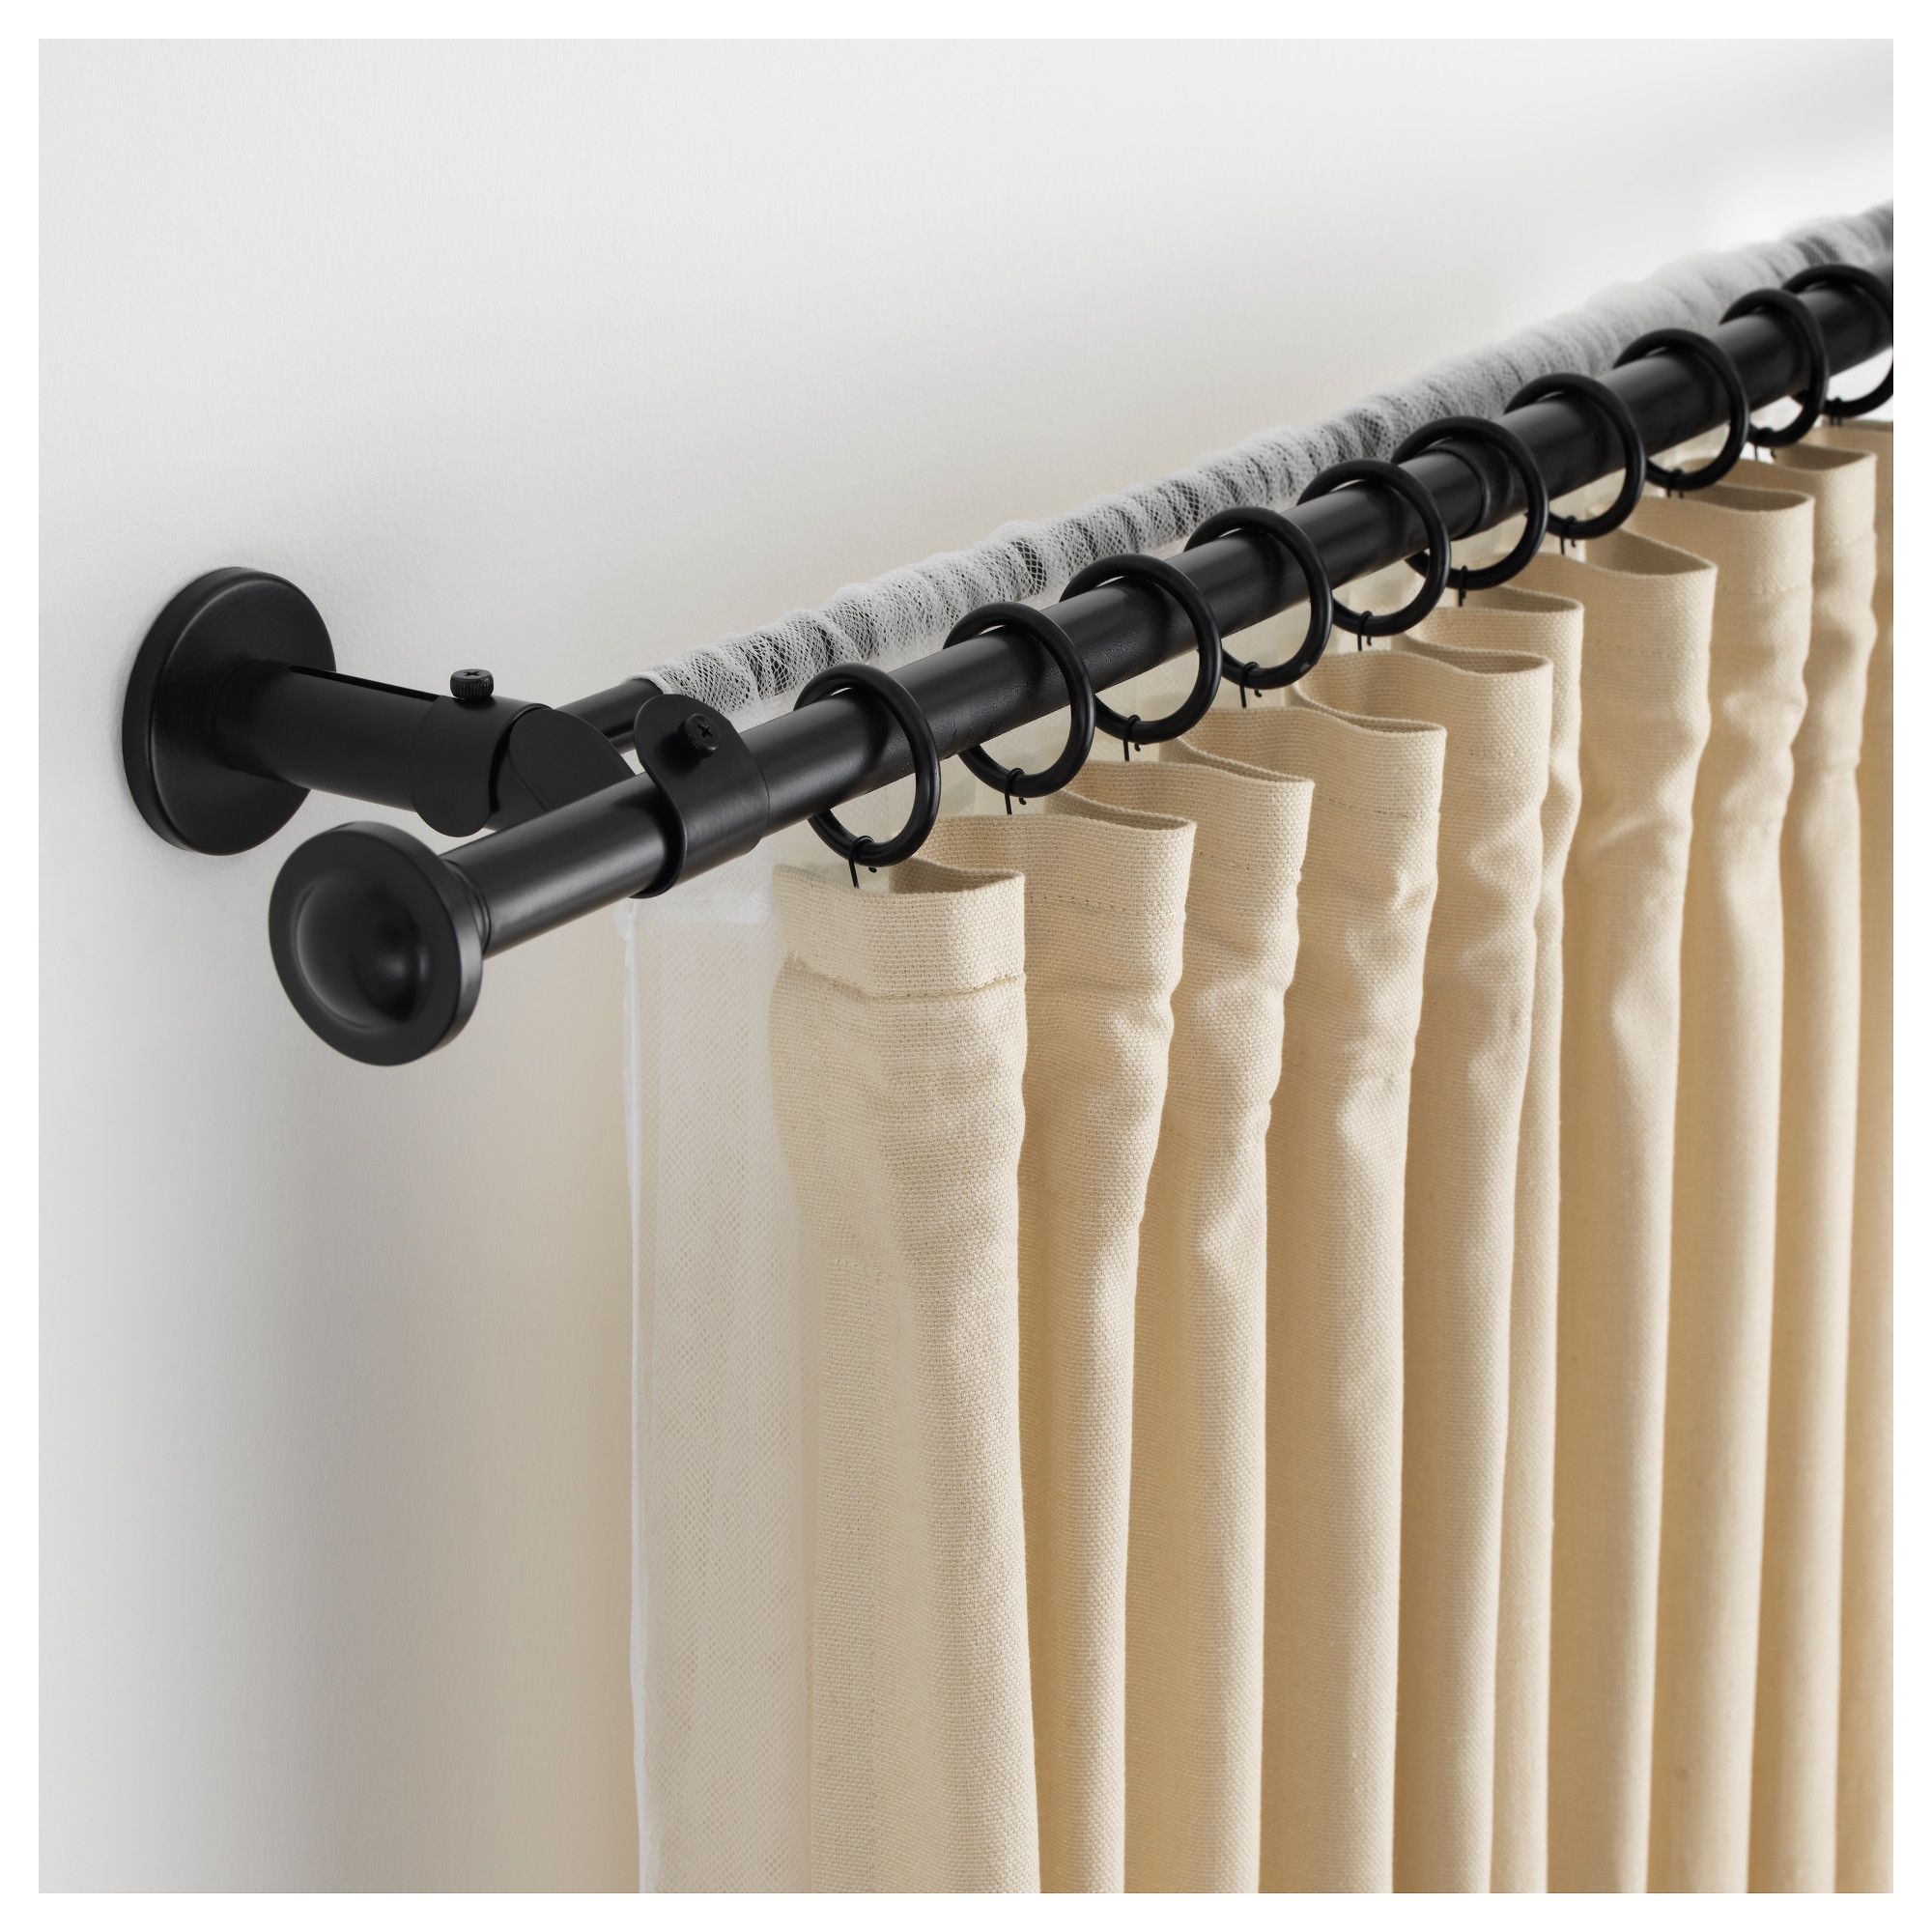 Furniture Great Curtain Rods Bed Bath And Beyond For Window And With Regard To Wooden Curtain Poles (View 18 of 25)